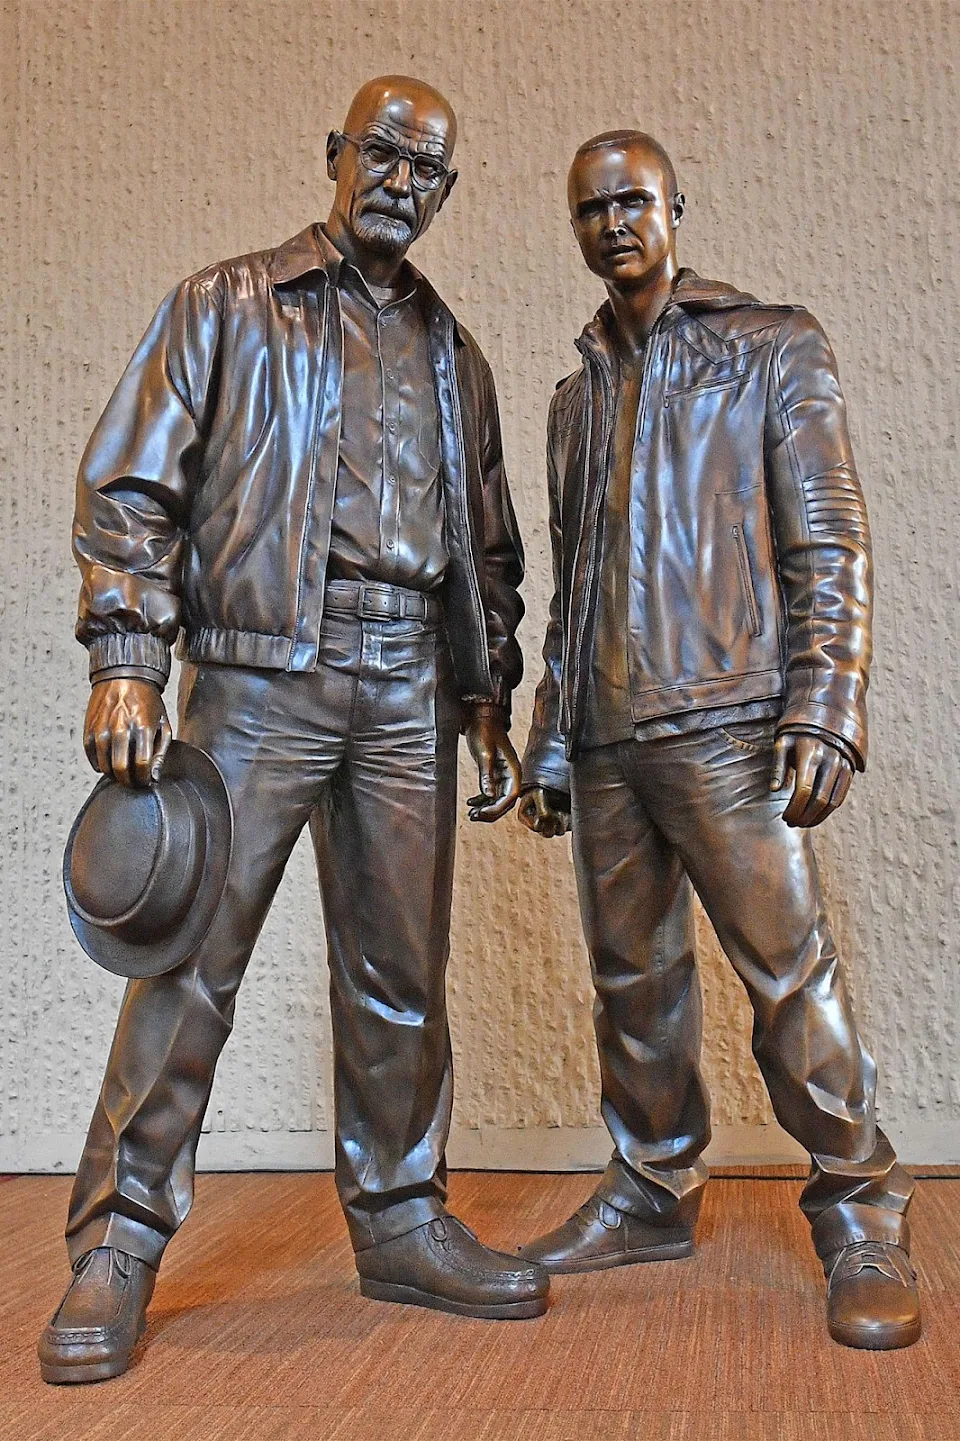 Statues of Walter White and Jessie Pinkman in Albuquerque, New Mexico were recently unveiled